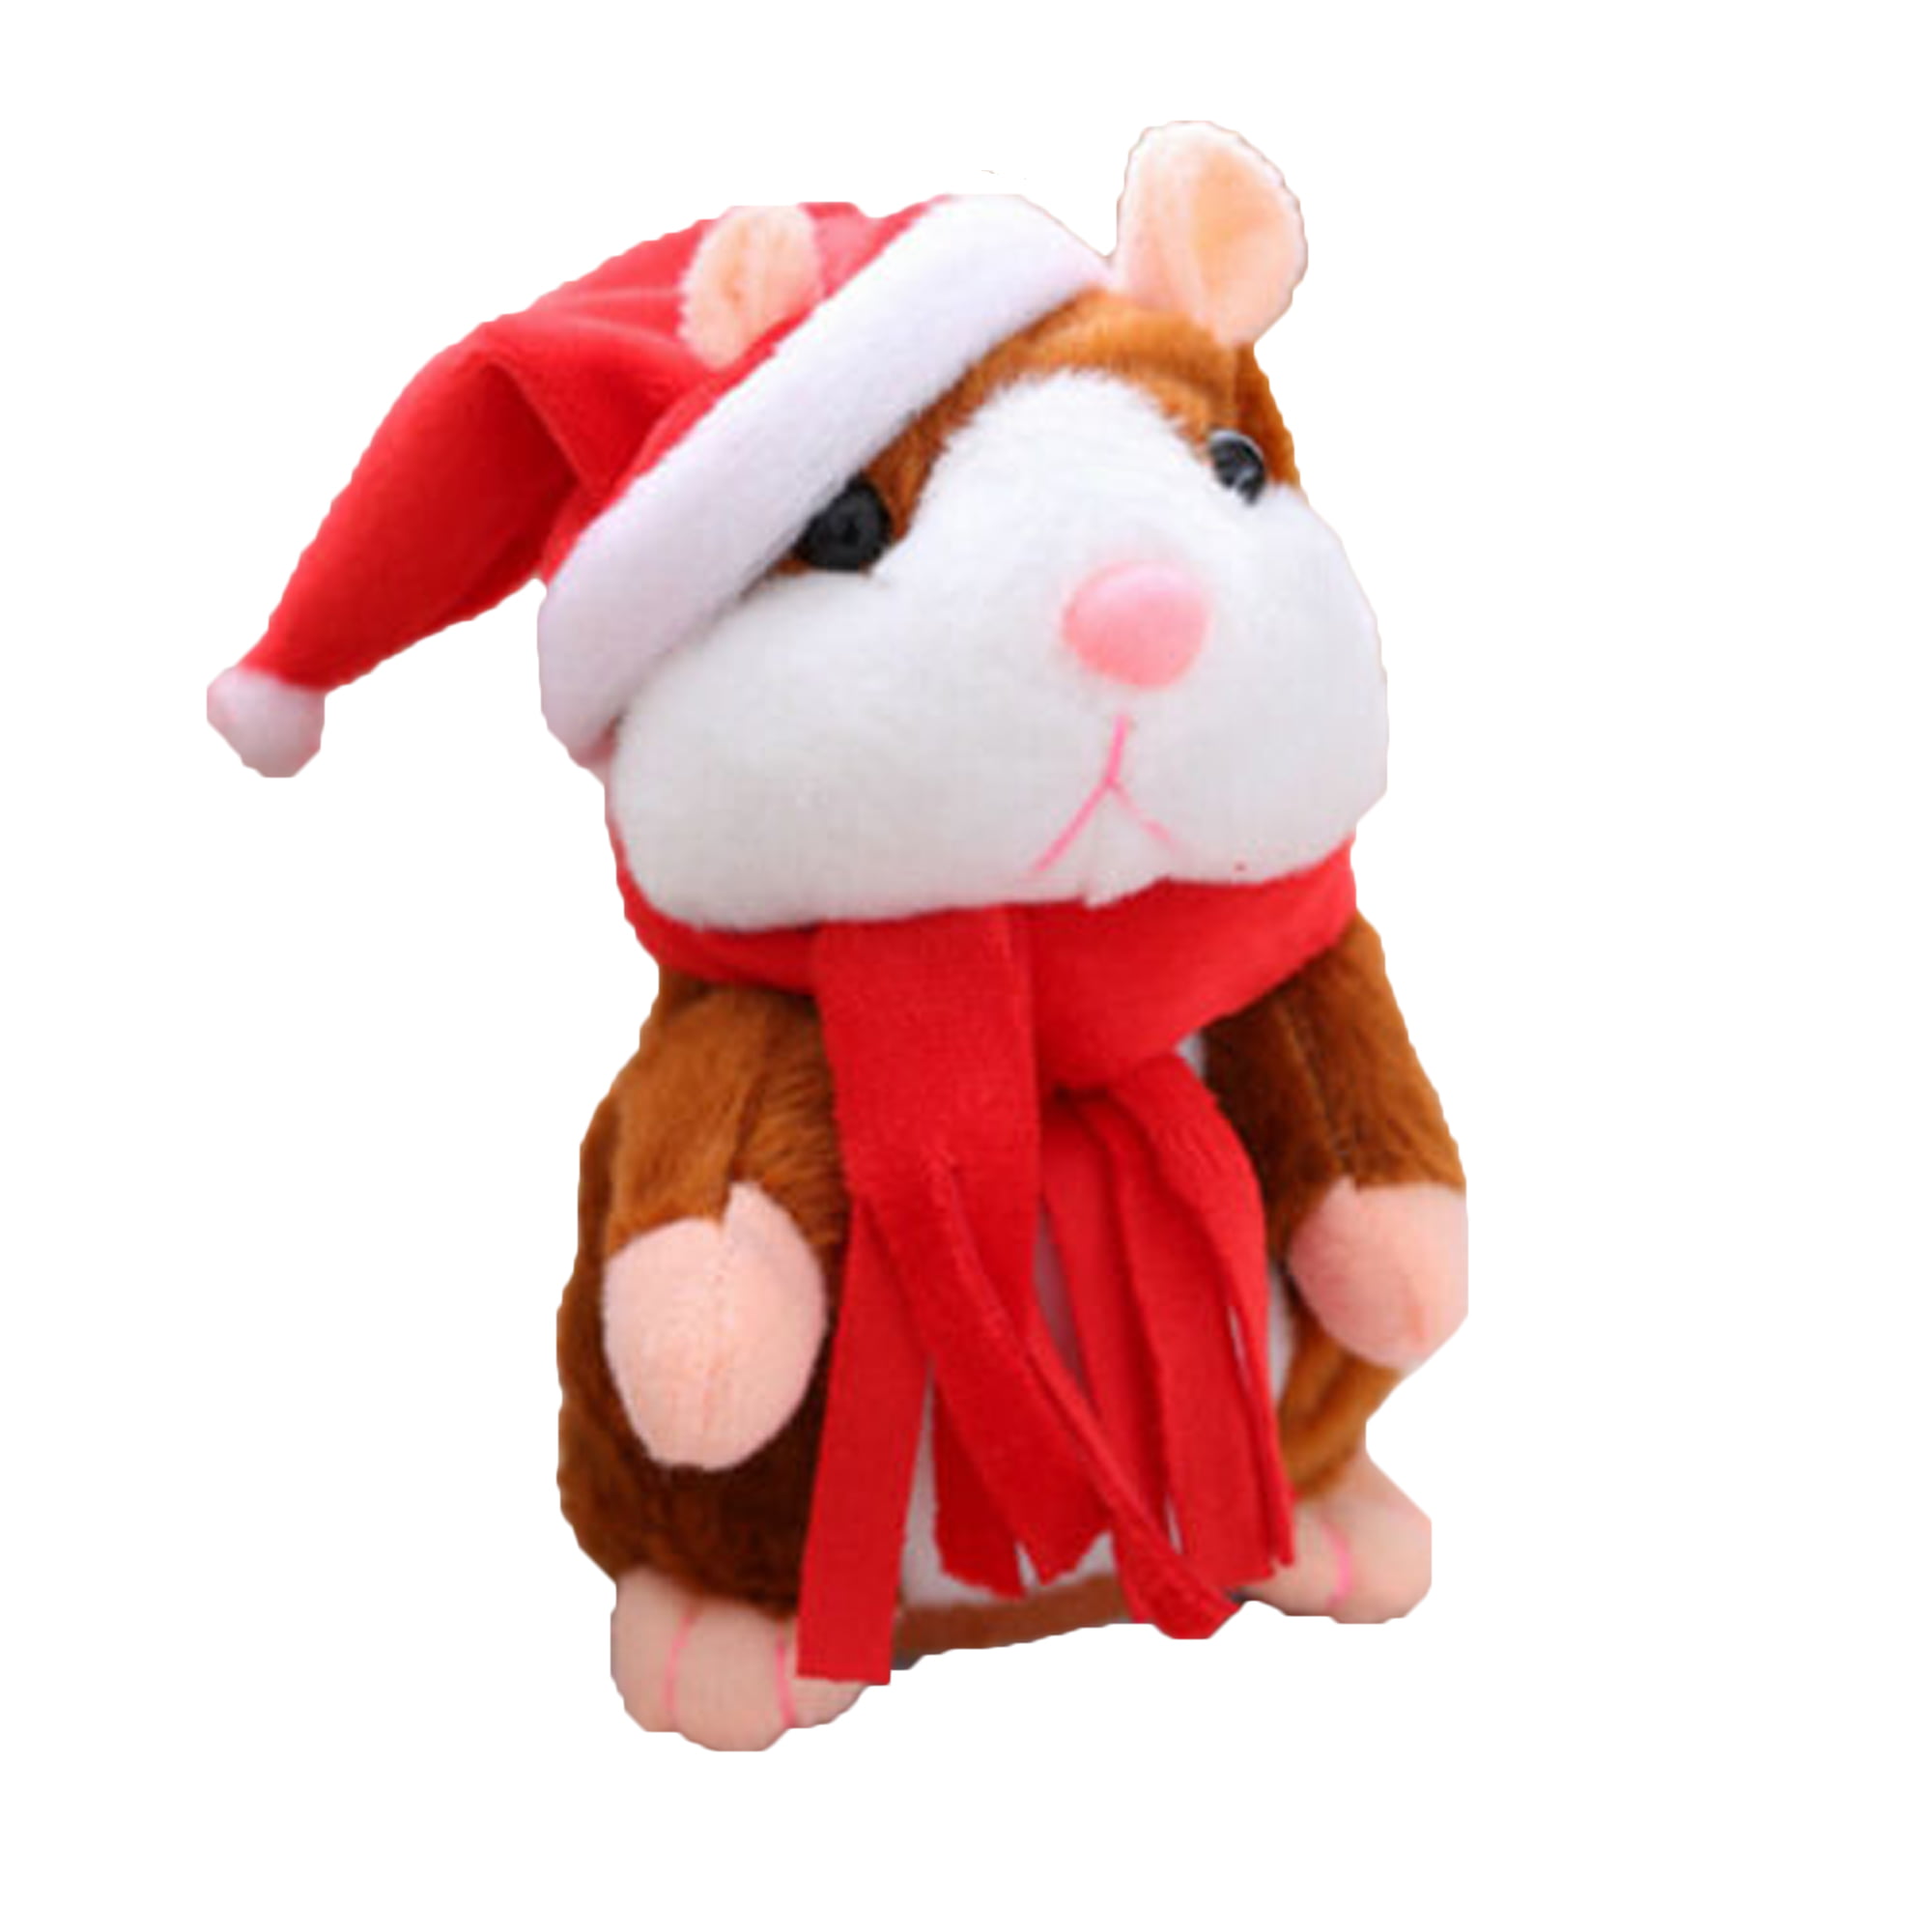 Cheeky Hamster Talking Walking Nodding Sound Record Electric Toy Xmas Gift 2019 